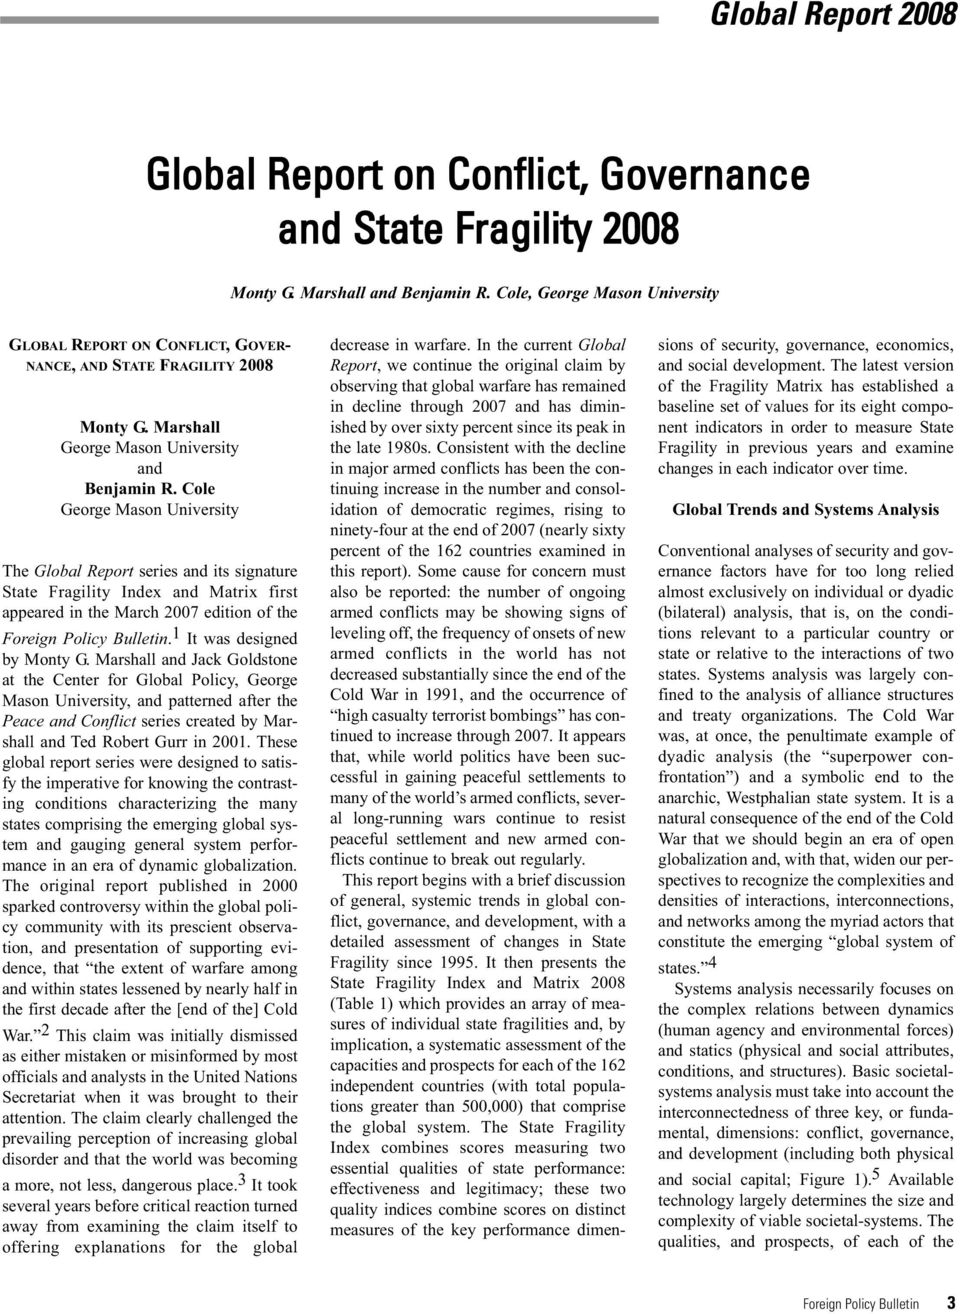 Cole George Mason University The Global Report series and its signature State Fragility Index and Matrix first appeared in the March 2007 edition of the Foreign Policy Bulletin.